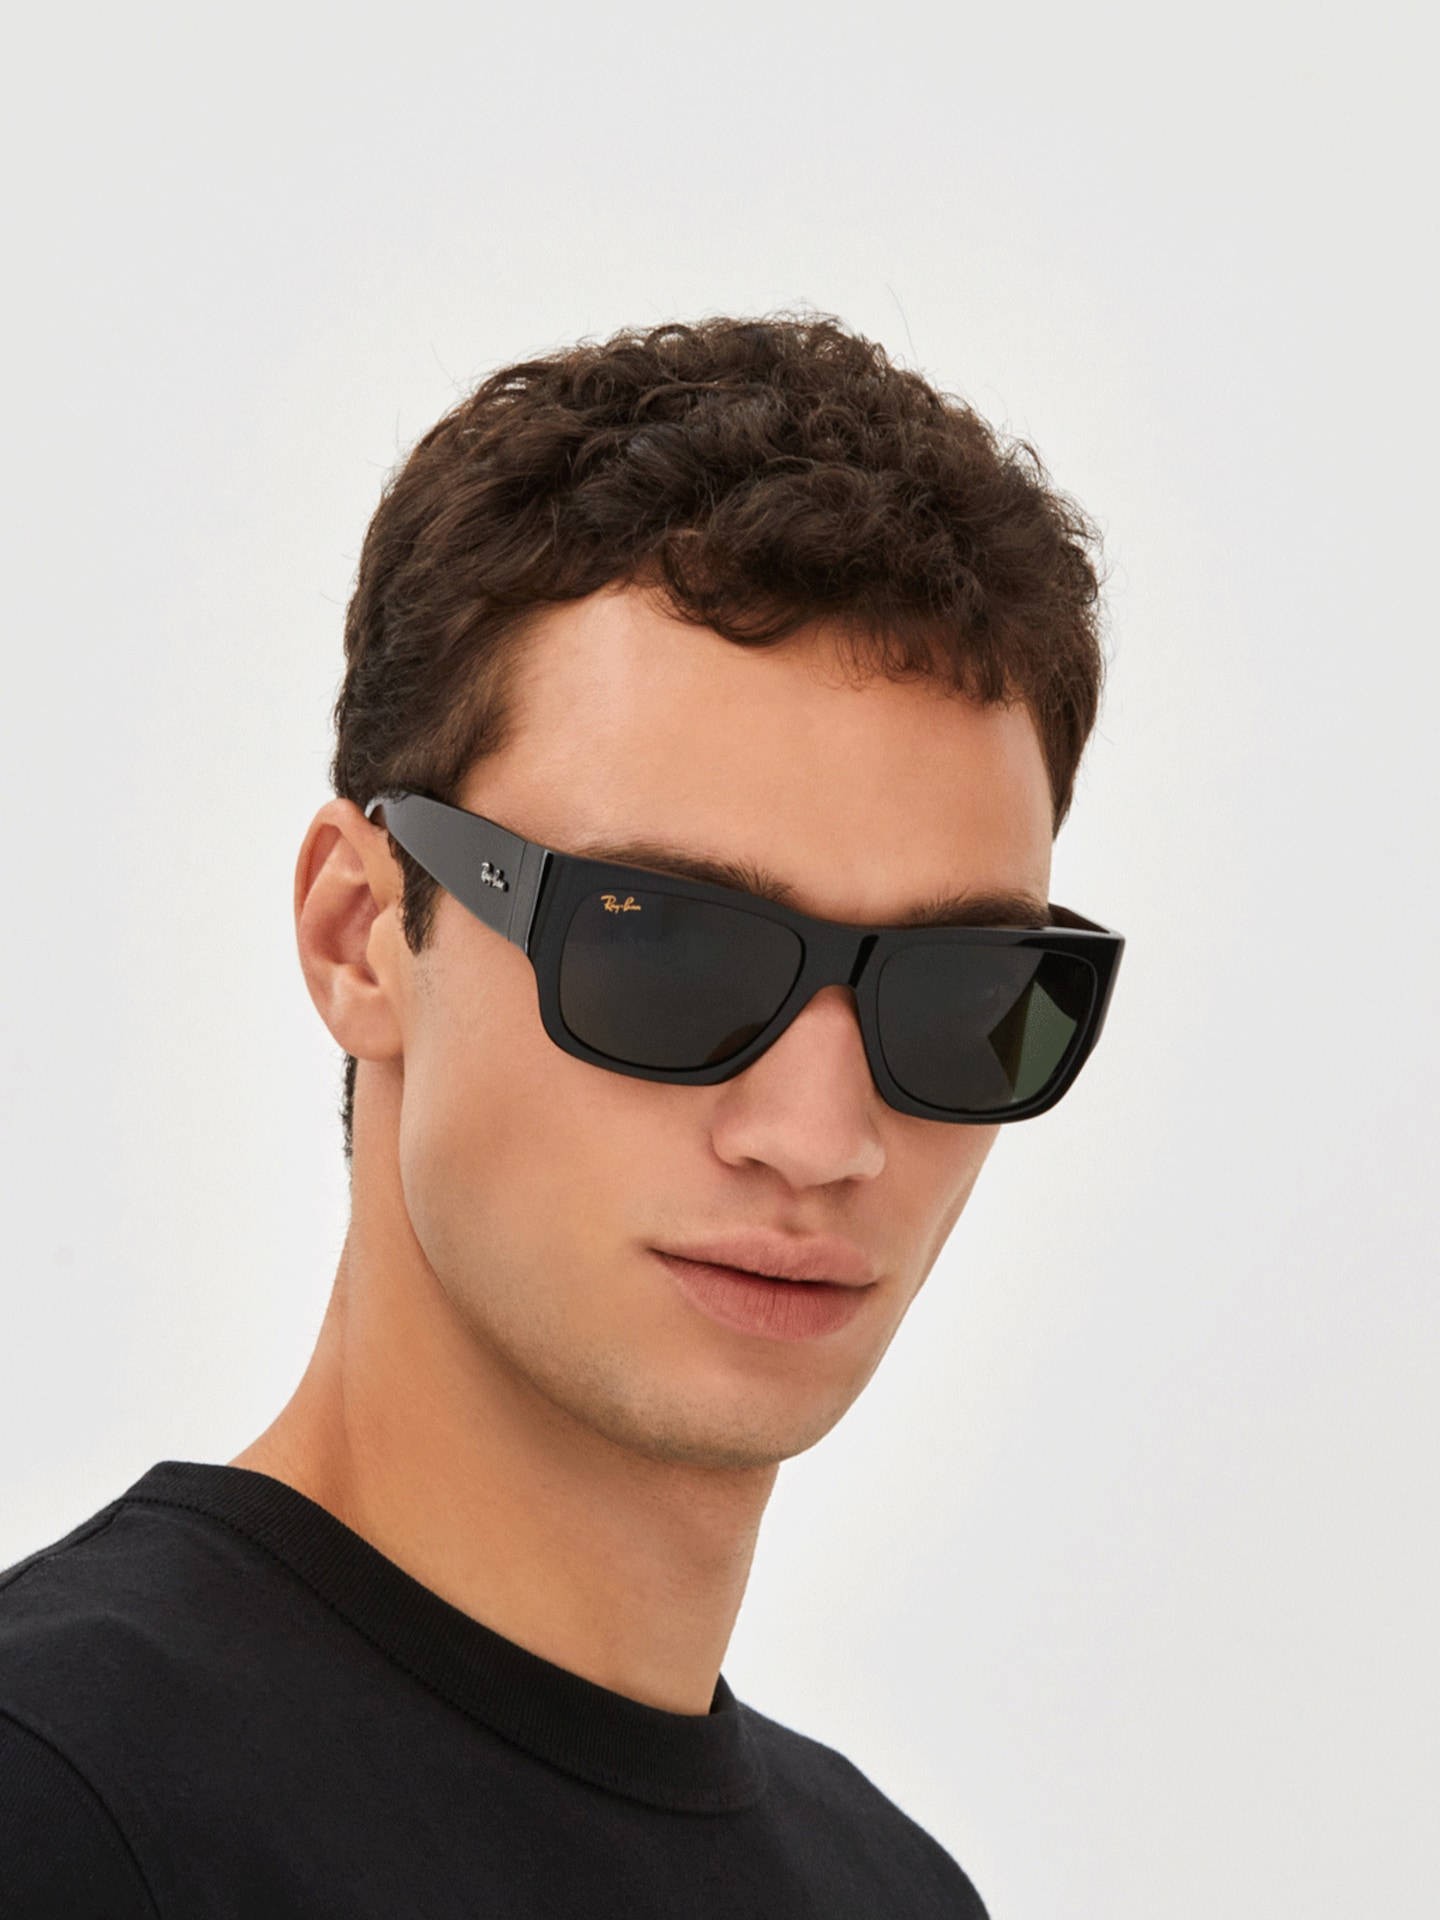 latest ray ban sunglasses for men. latest ray ban sunglasses for